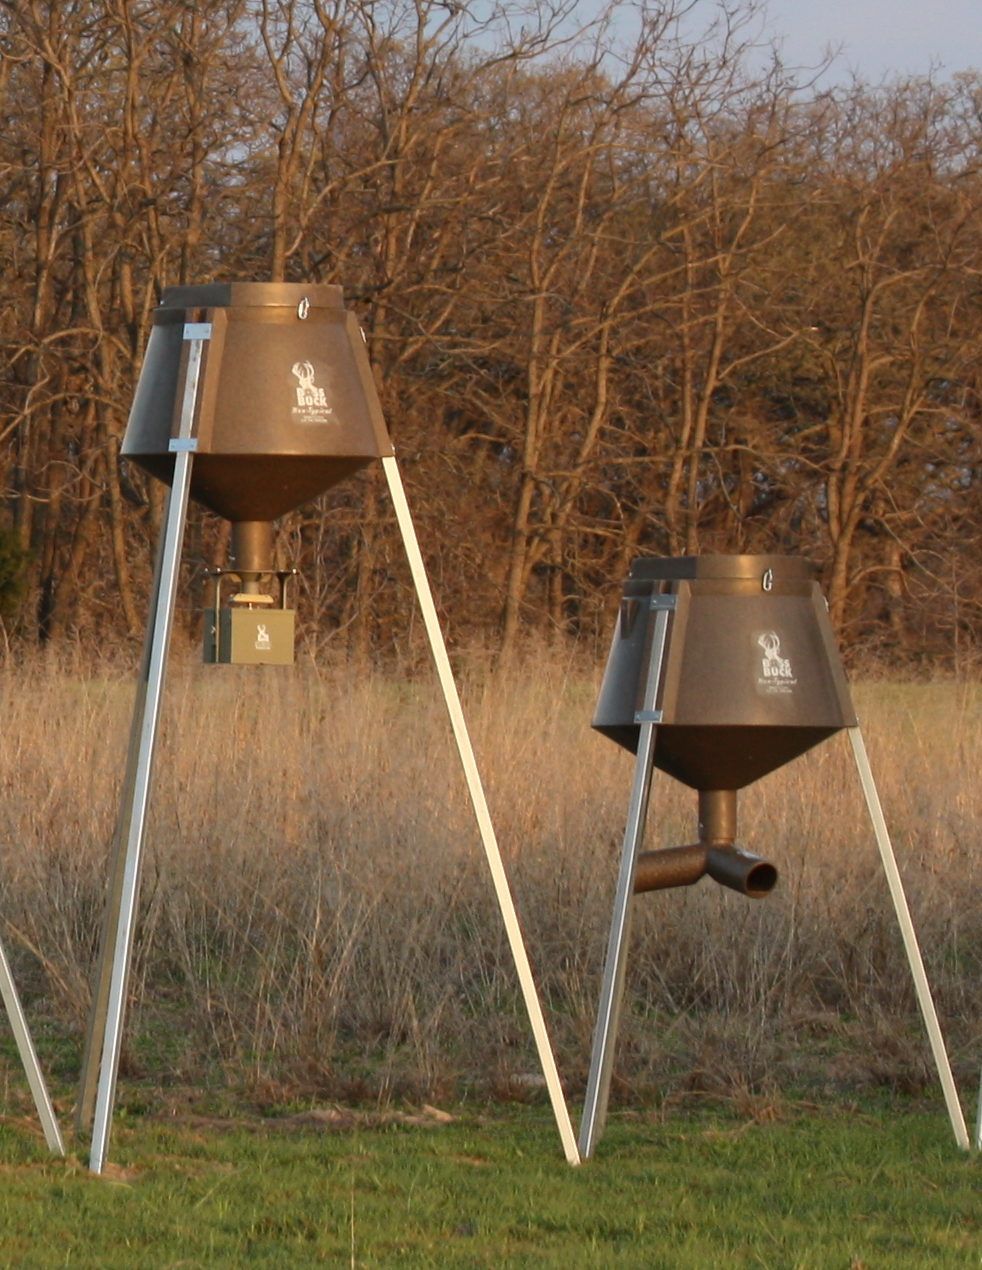 two deer feeders are sitting in a field with trees in the background